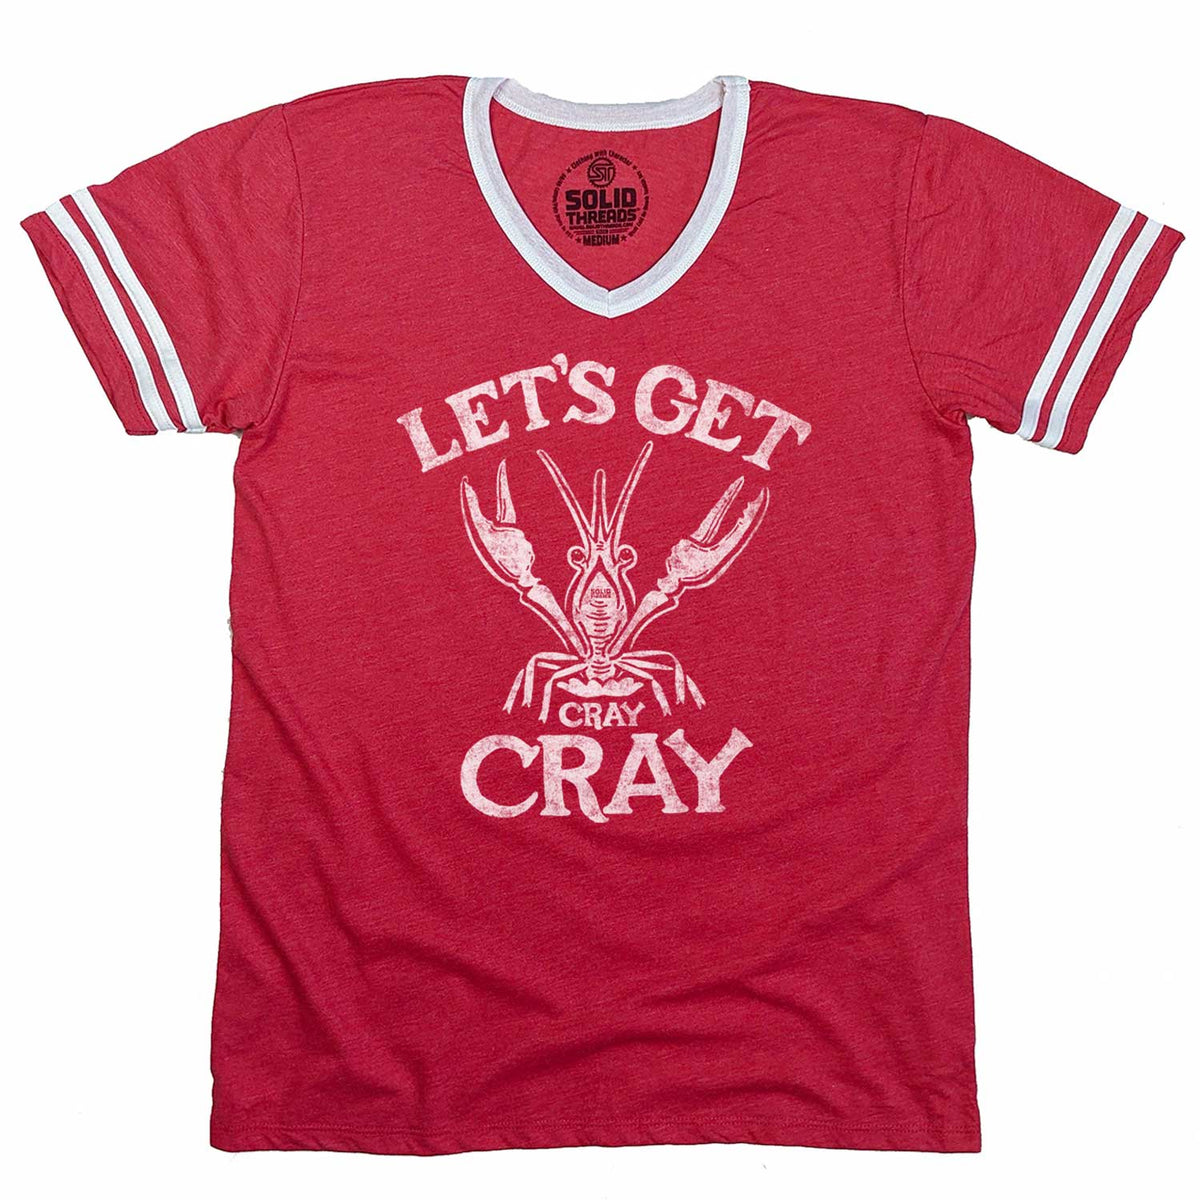 Men&#39;s Let&#39;s Get Cray Cray Vintage Graphic V-Neck Tee | Funny Crawfish T-shirt | Solid Threads